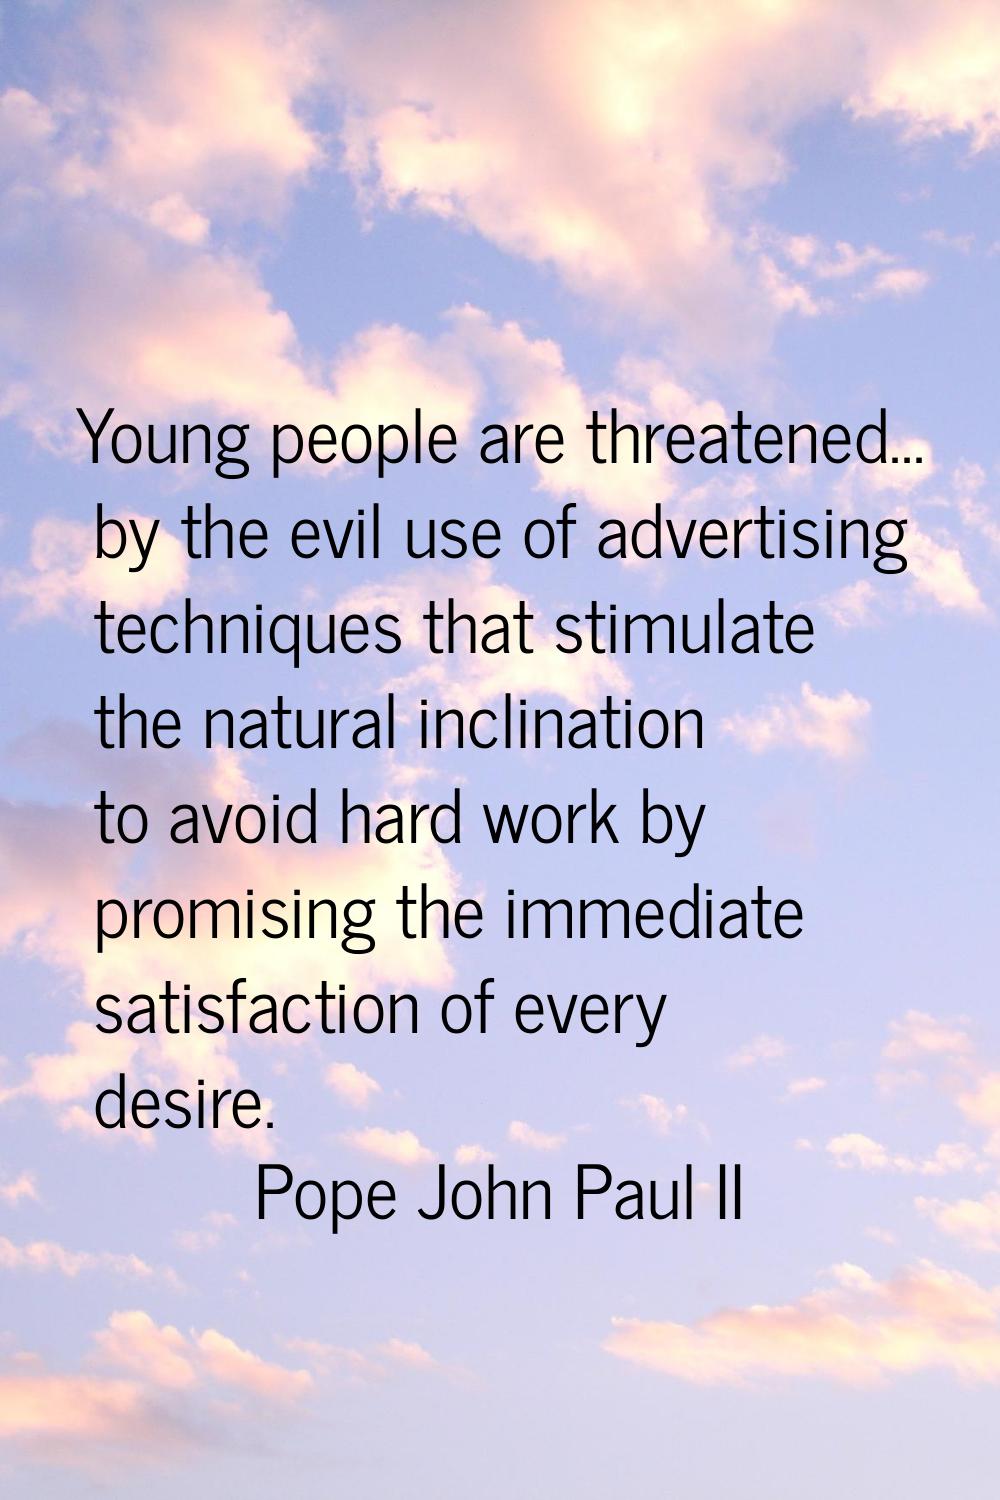 Young people are threatened... by the evil use of advertising techniques that stimulate the natural